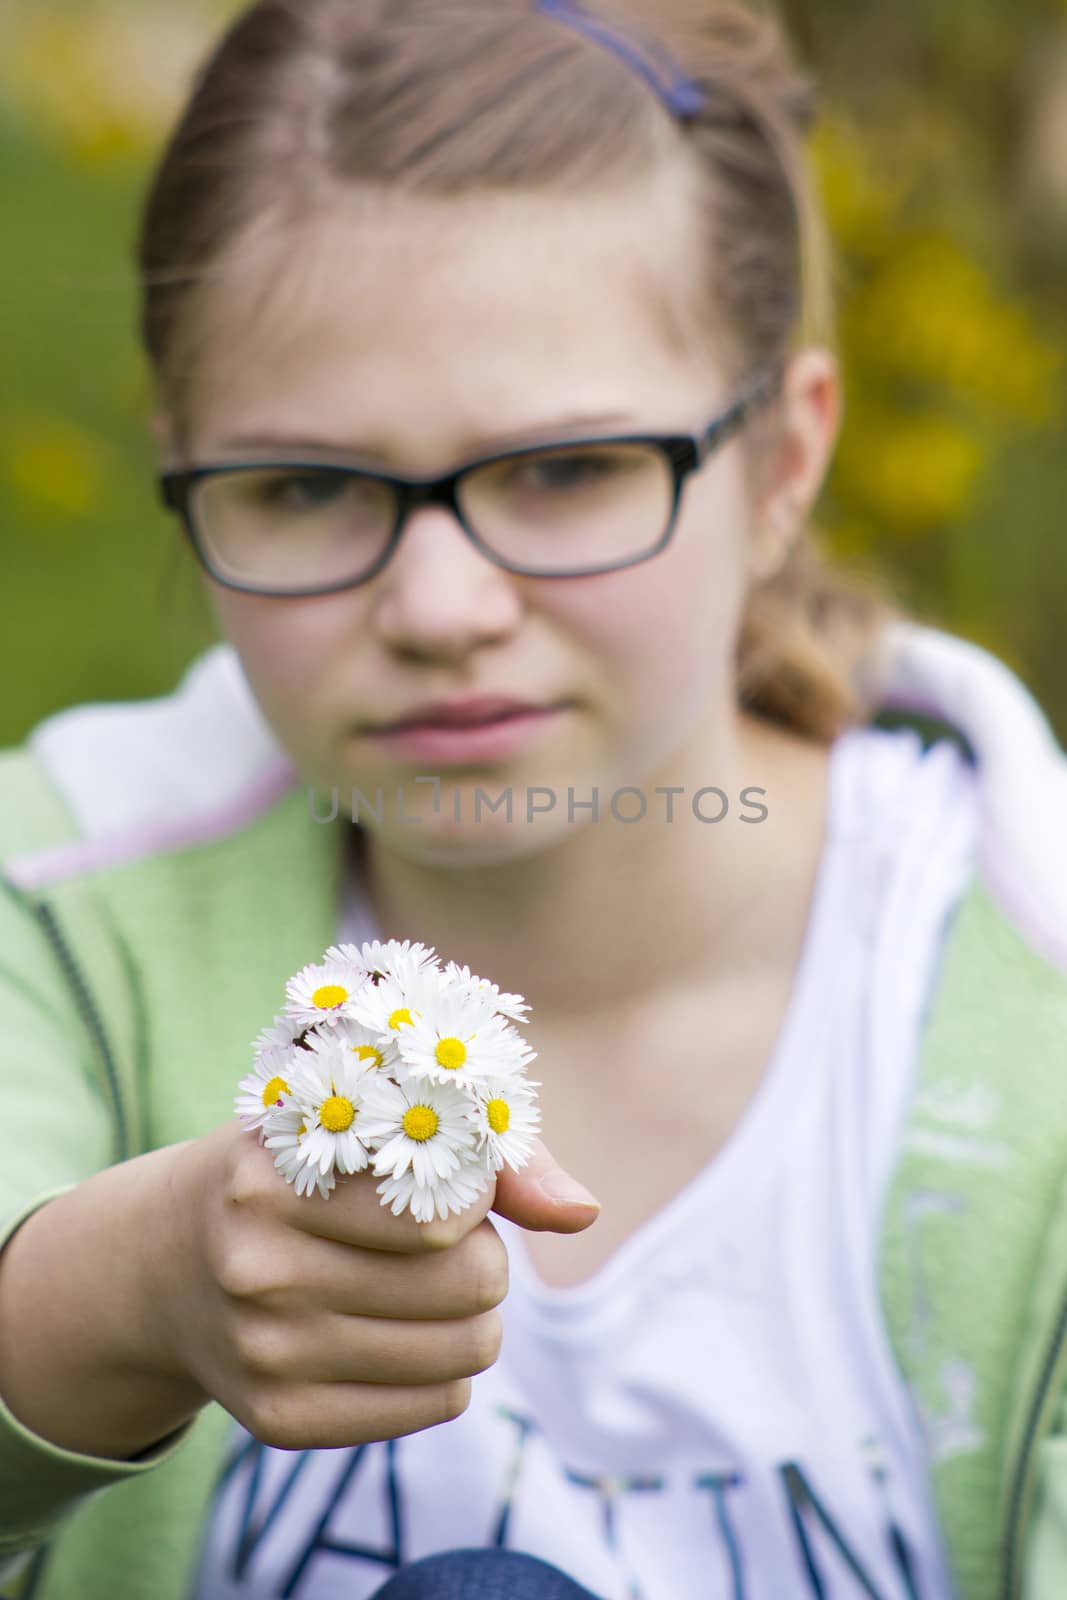 daisies - a gift for the mother by miradrozdowski